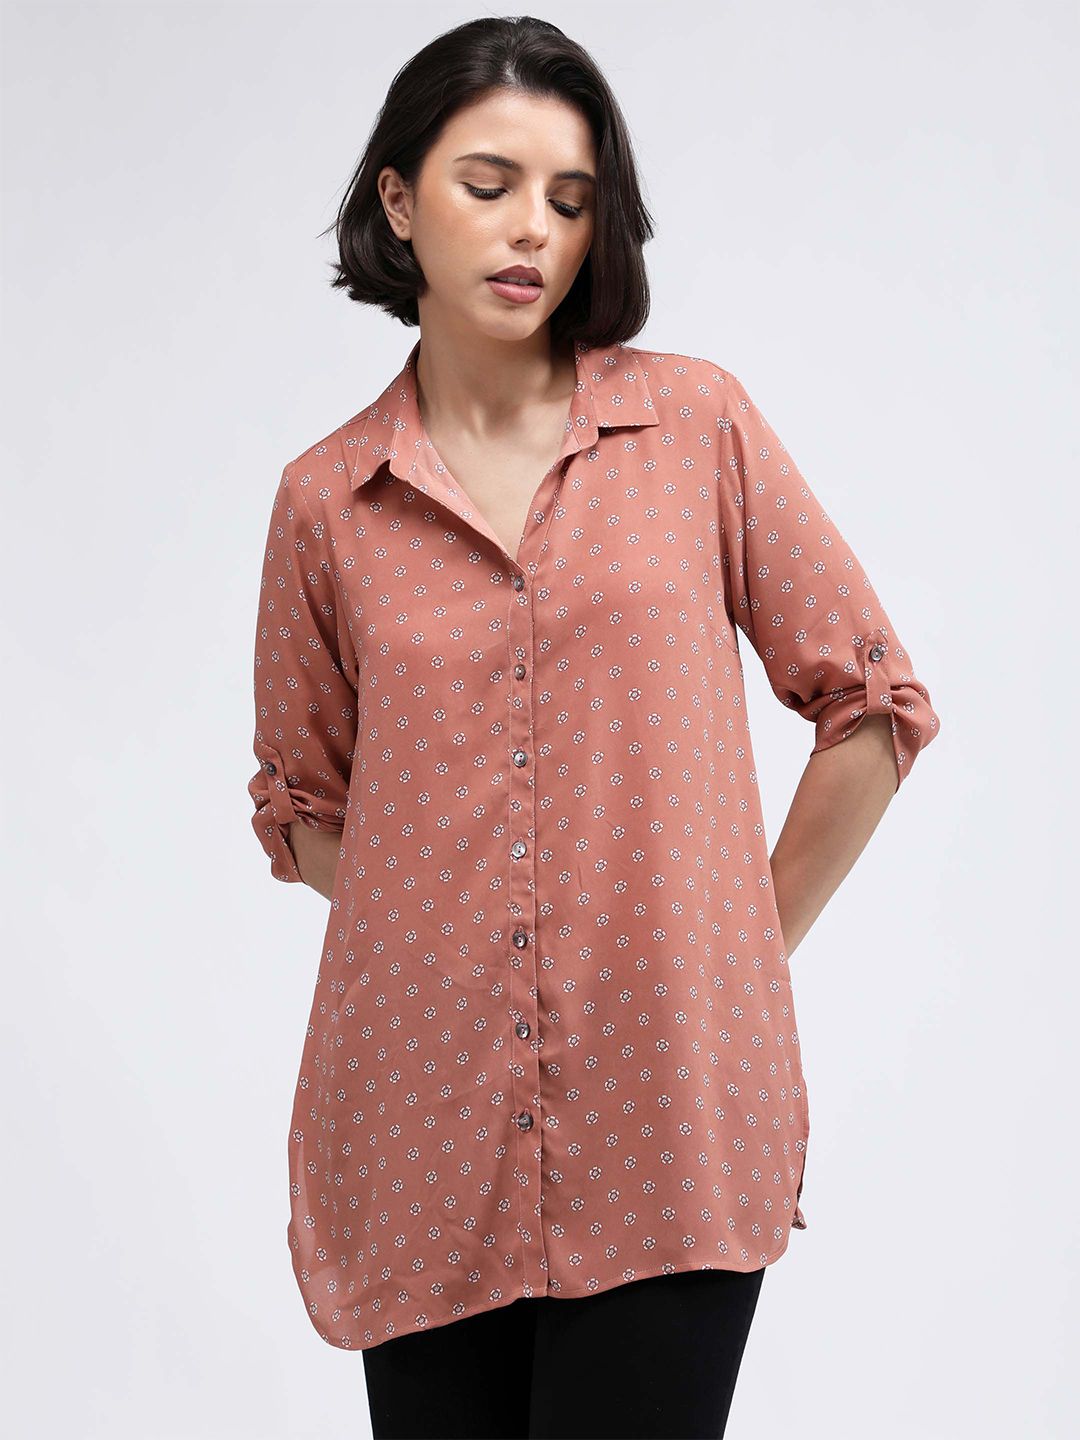 IDK Women Peach-Coloured & White Floral Print Roll-Up Sleeves Shirt Style Longline Top Price in India